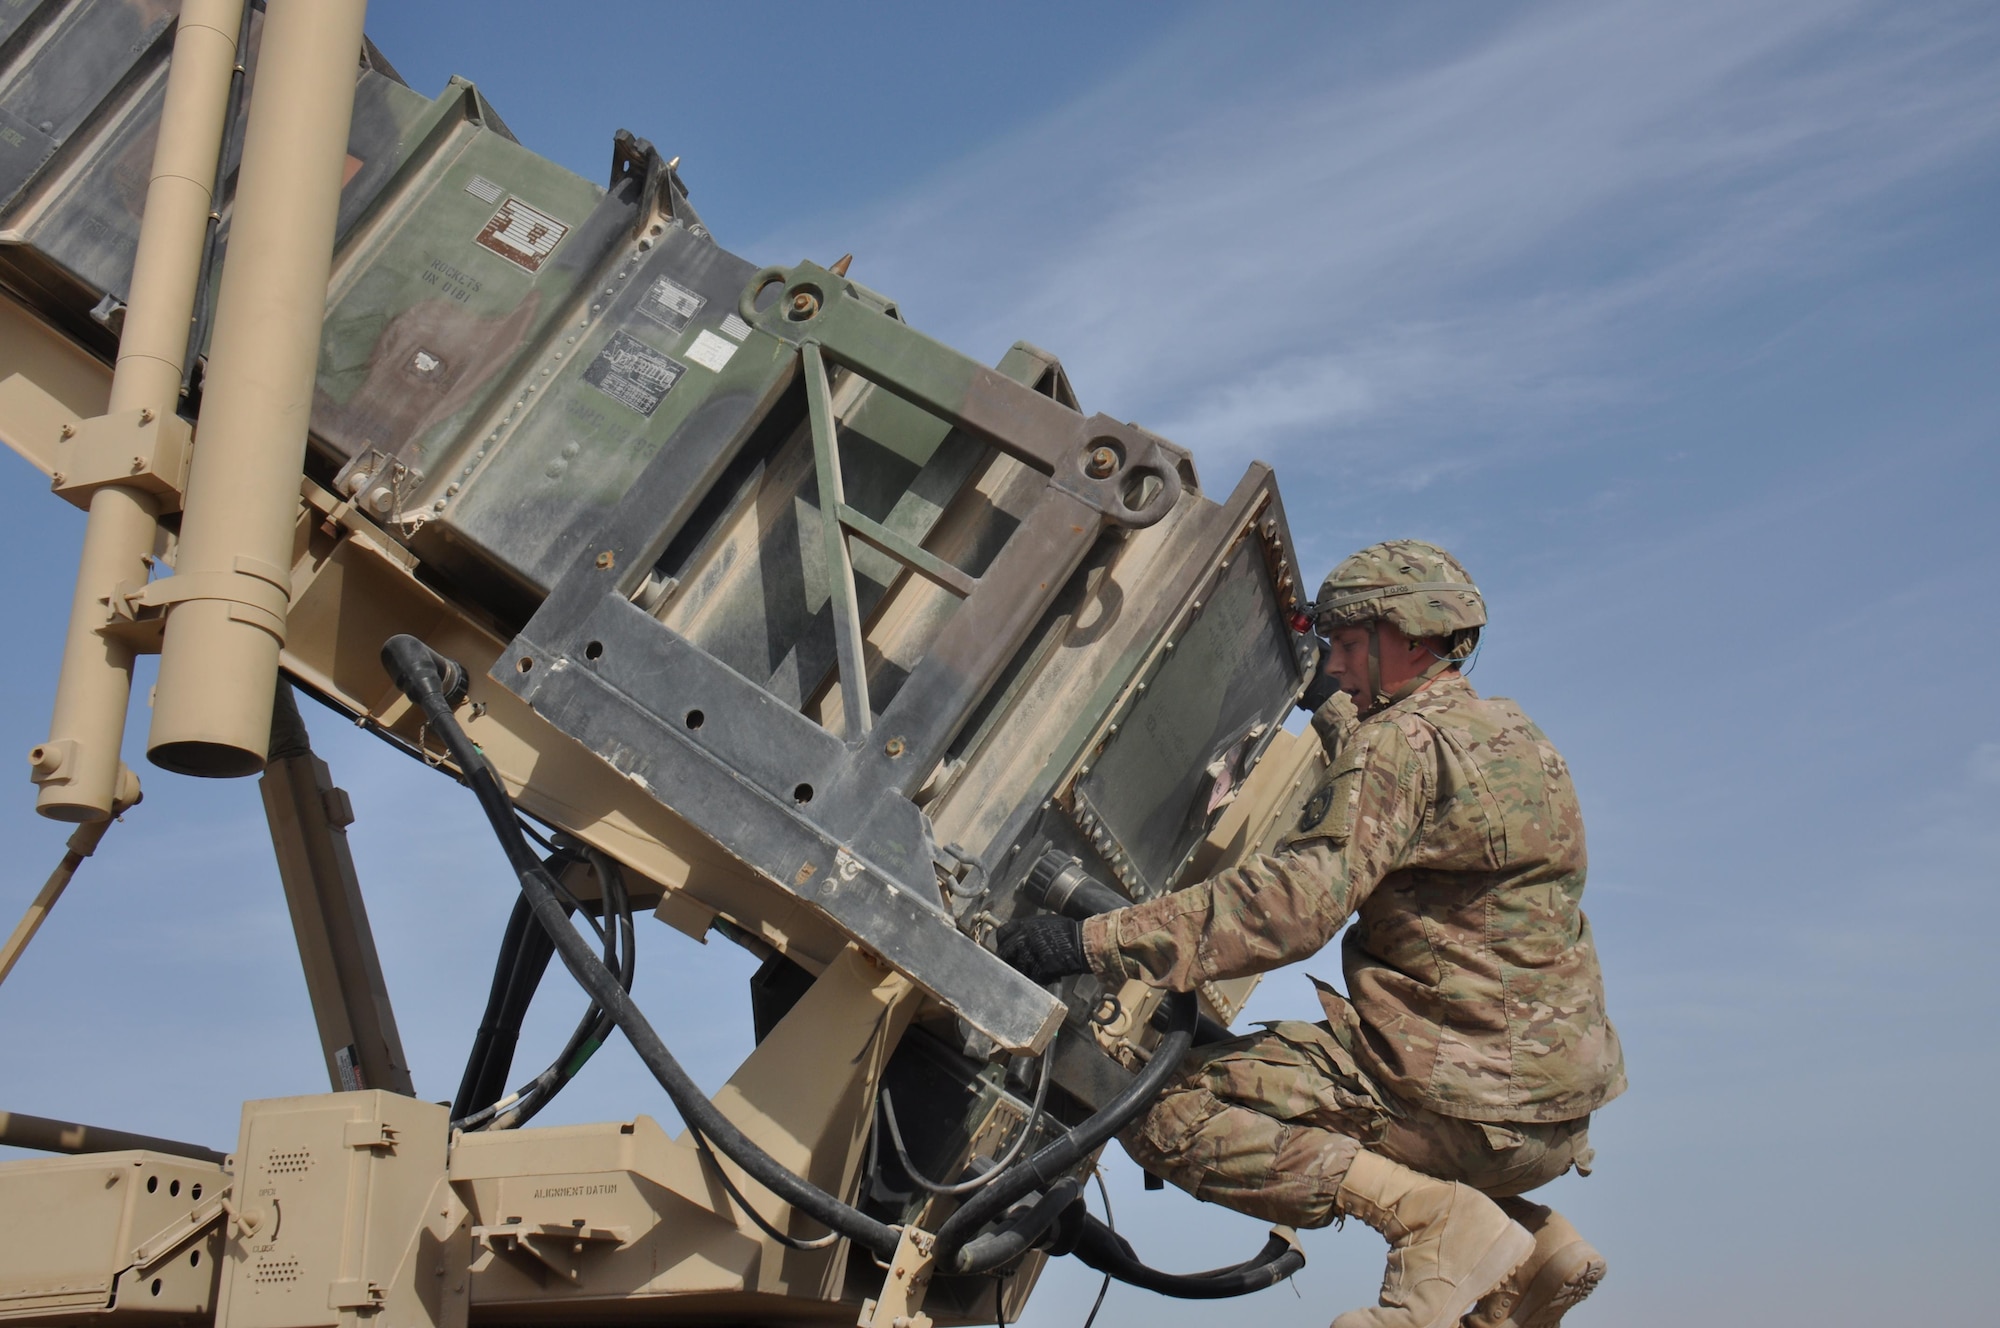 Pfc. James Weaver, 1-62 Delta Battery Air Defense Artillery Regiment Patriot station launcher operator and maintainer from Steelville, Missouri, unlocks torque tubes behind a PAC-2 missile interceptor during an operational readiness exercise at Al Udeid Air Base, Qatar Mar. 4. The Patriot missiles at AUAB protect the base from a variety of airborne threats including tactical ballistic missiles and drones.  (U.S. Air Force photo by Tech. Sgt. James Hodgman/Released)